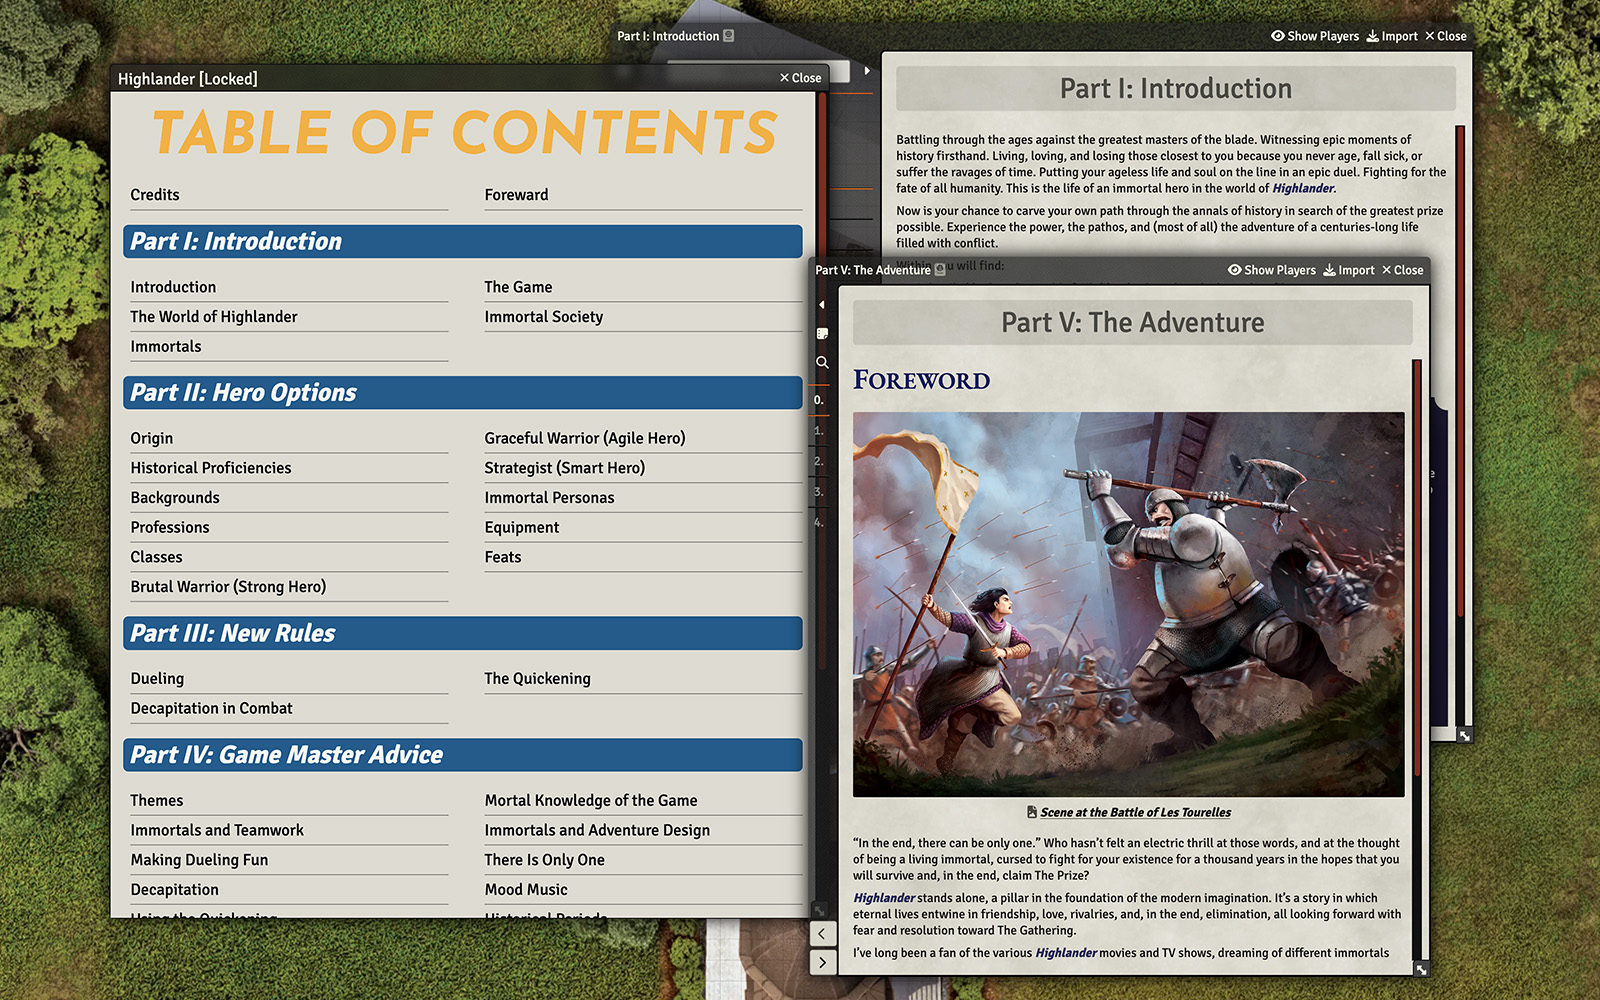 Screenshot of Highlander module with several compendiums open, the front one showing the introduction page with some artwork representing Battle of Les Tourelles.